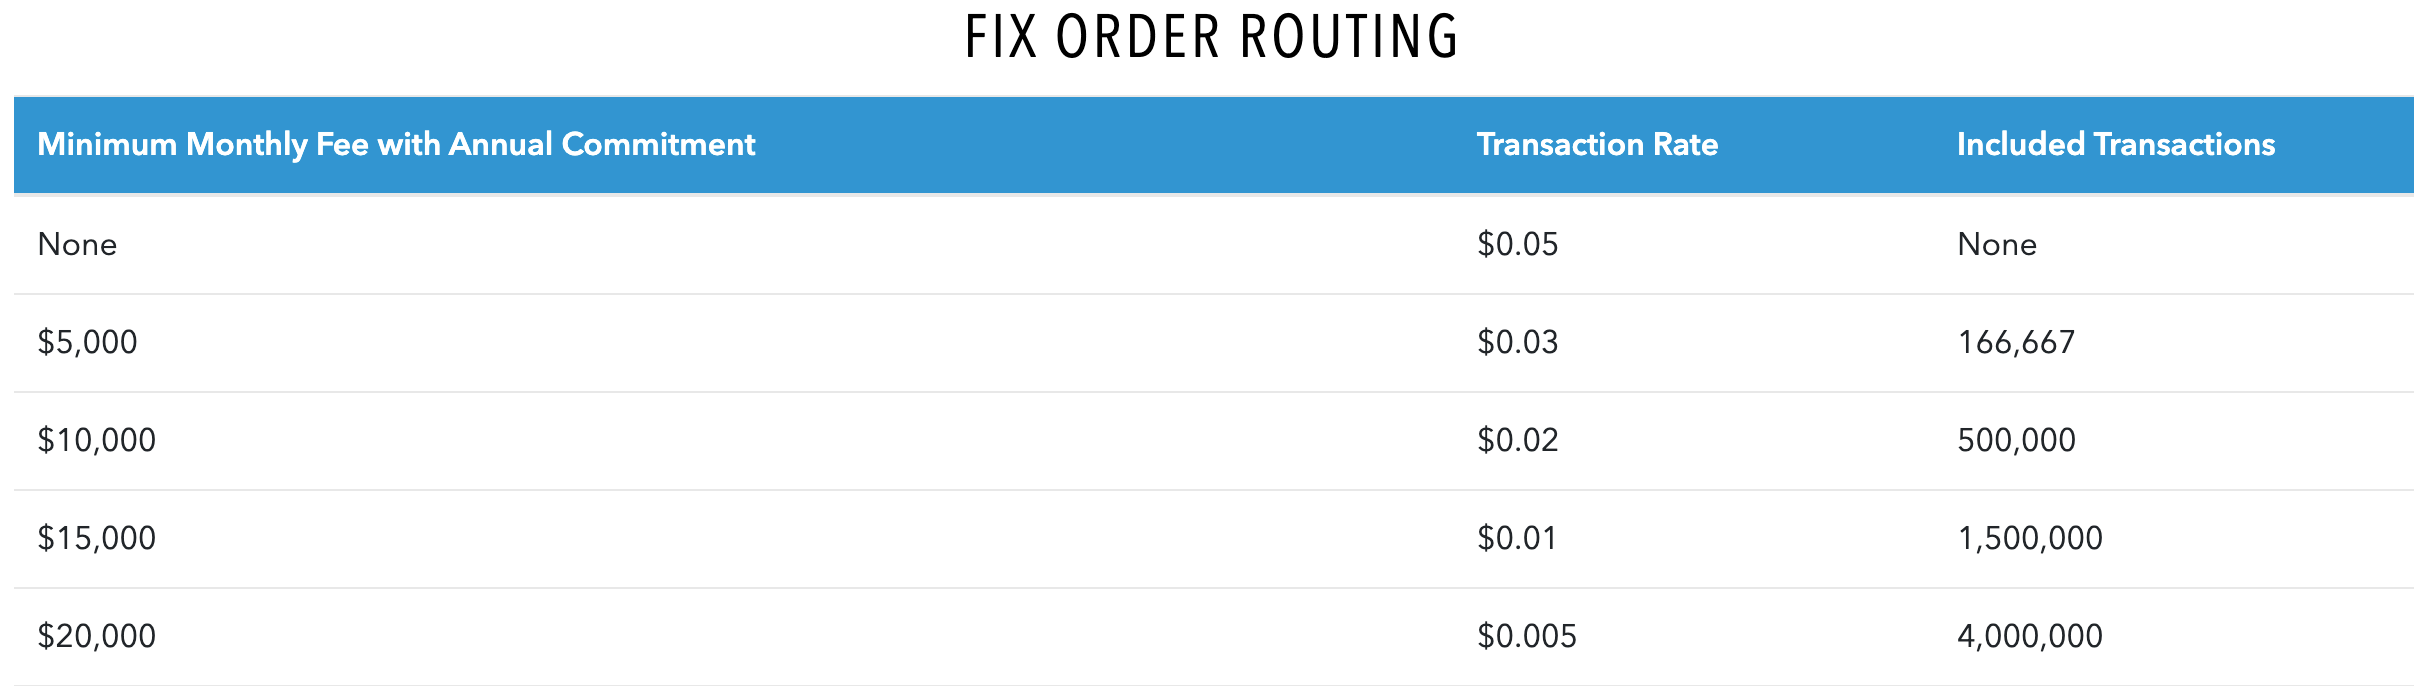 TT_FIX_ORDER_ROUTING_PRICING.png